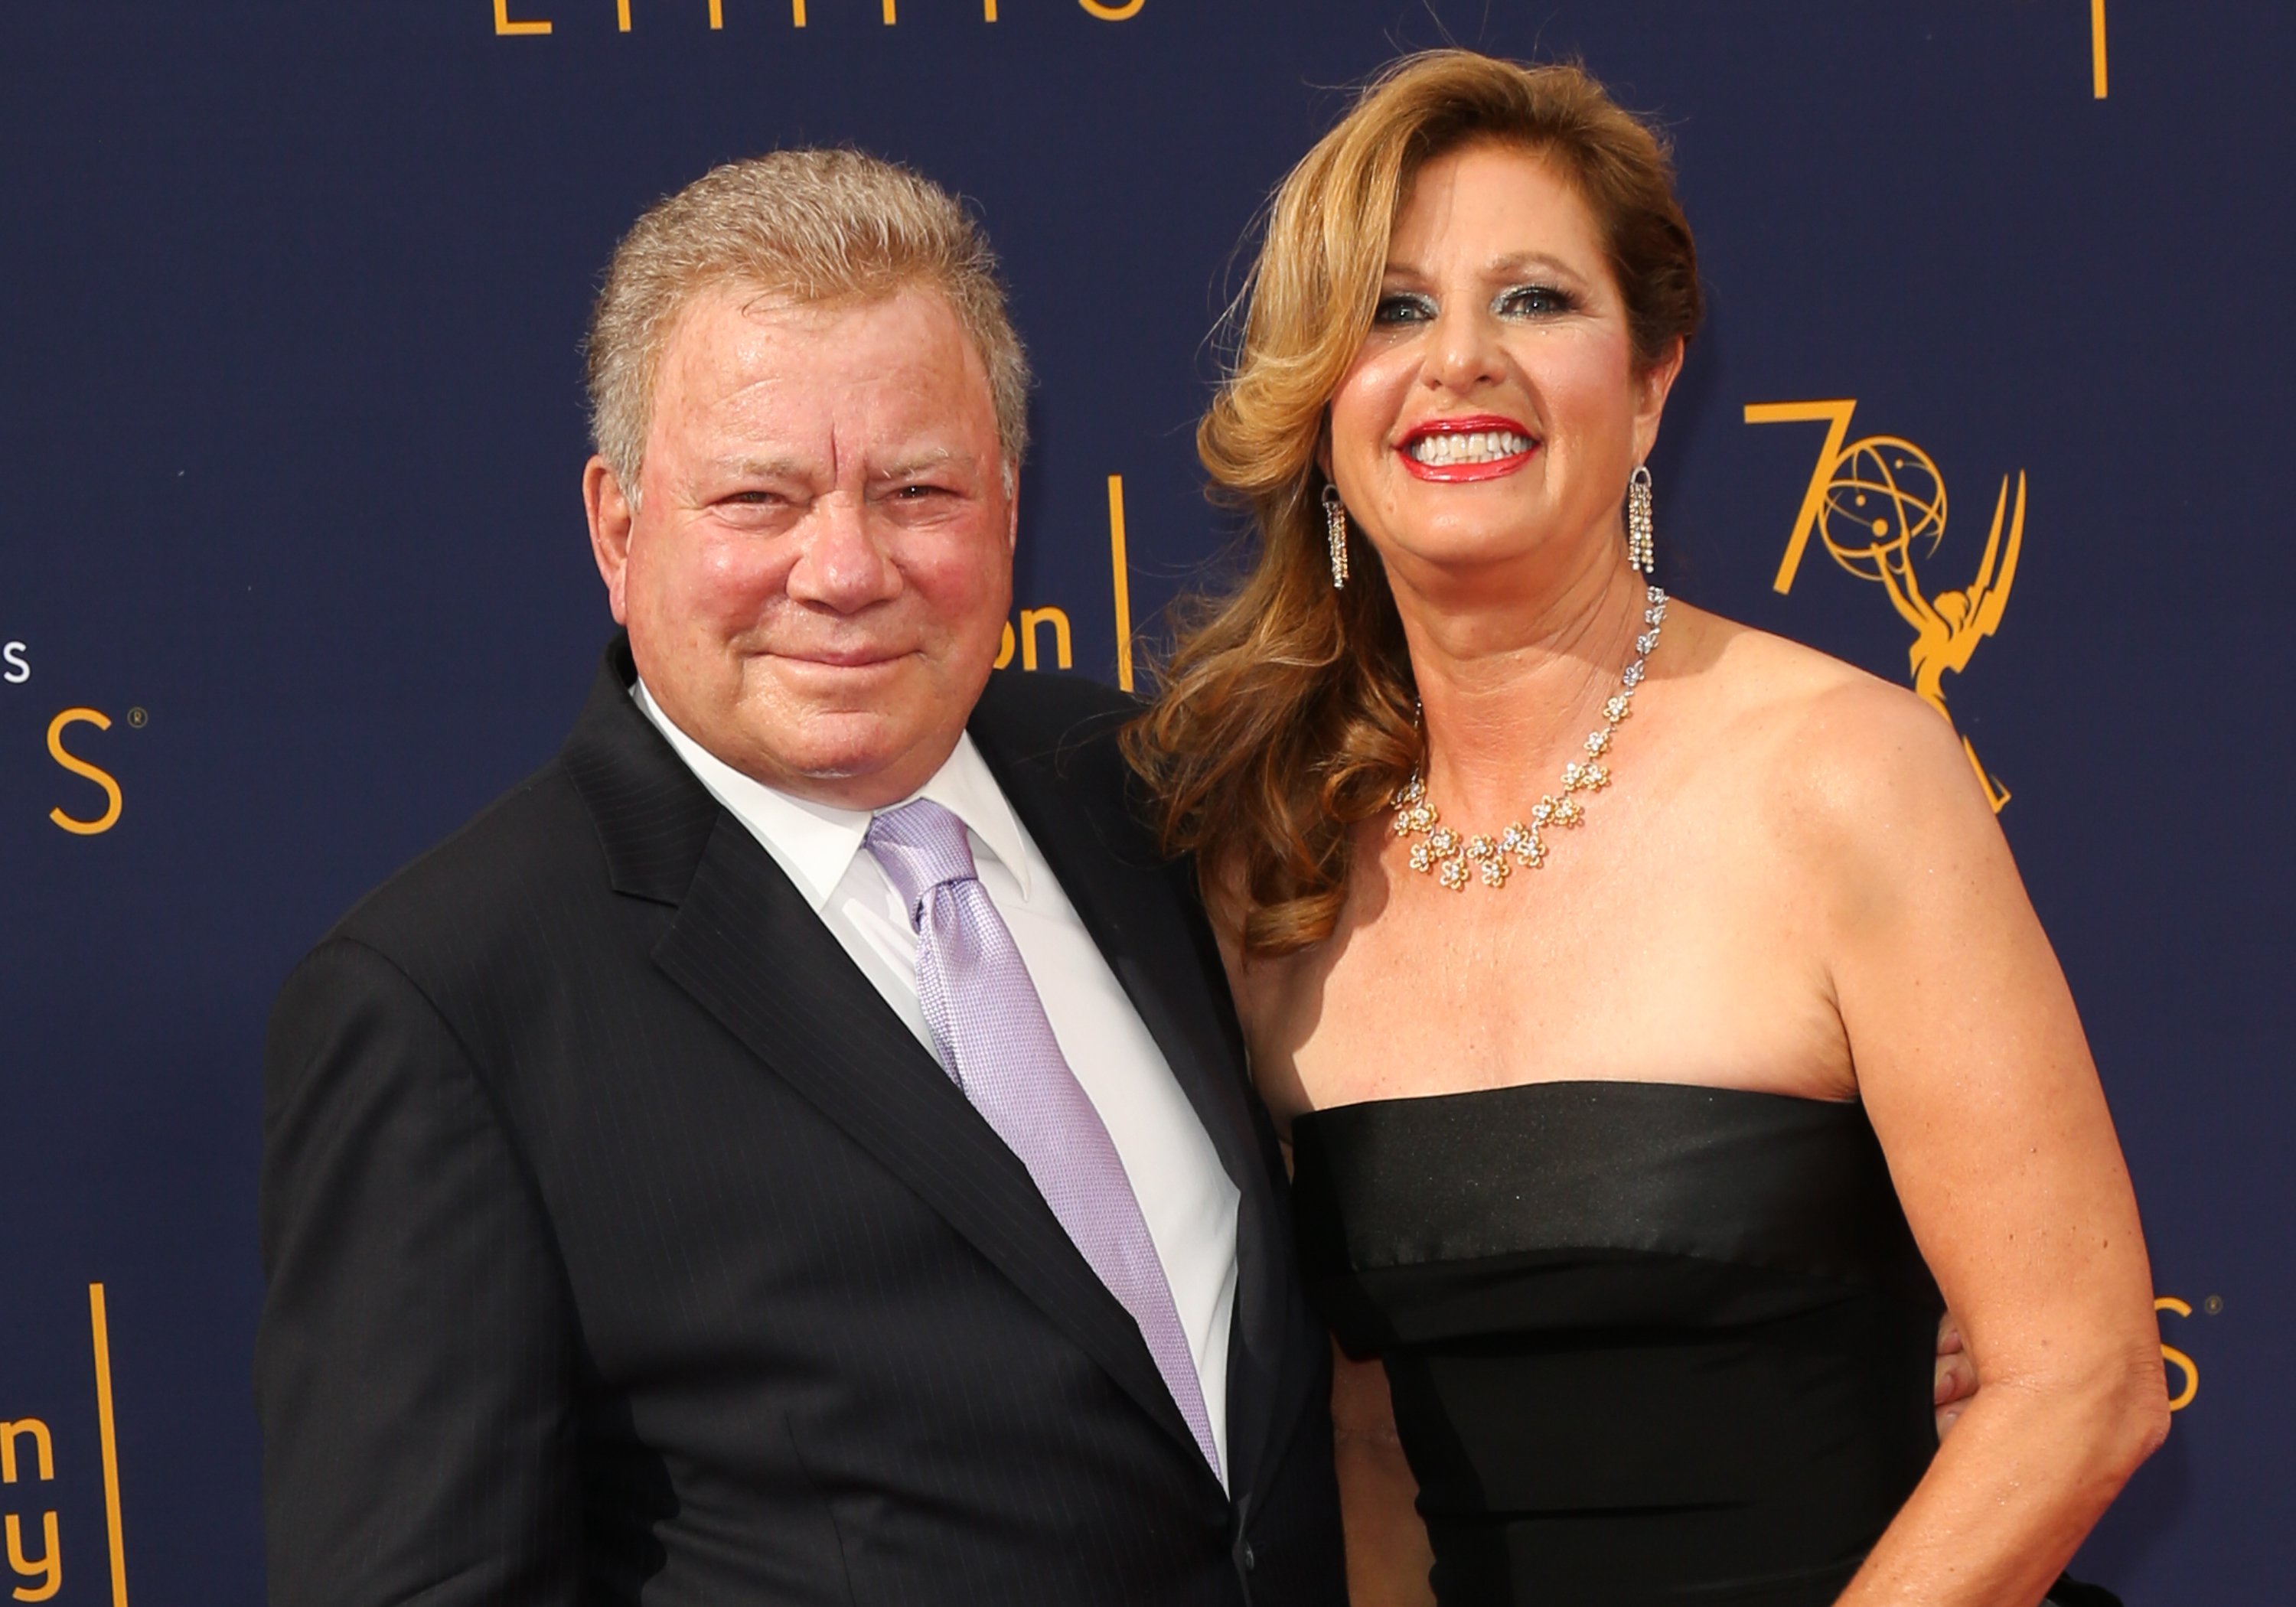 William Shatner and his wife, Elizabeth Shatner, at the Creative Arts Emmy Awards on September 8, 2018, in Los Angeles, California | Source: Getty Images